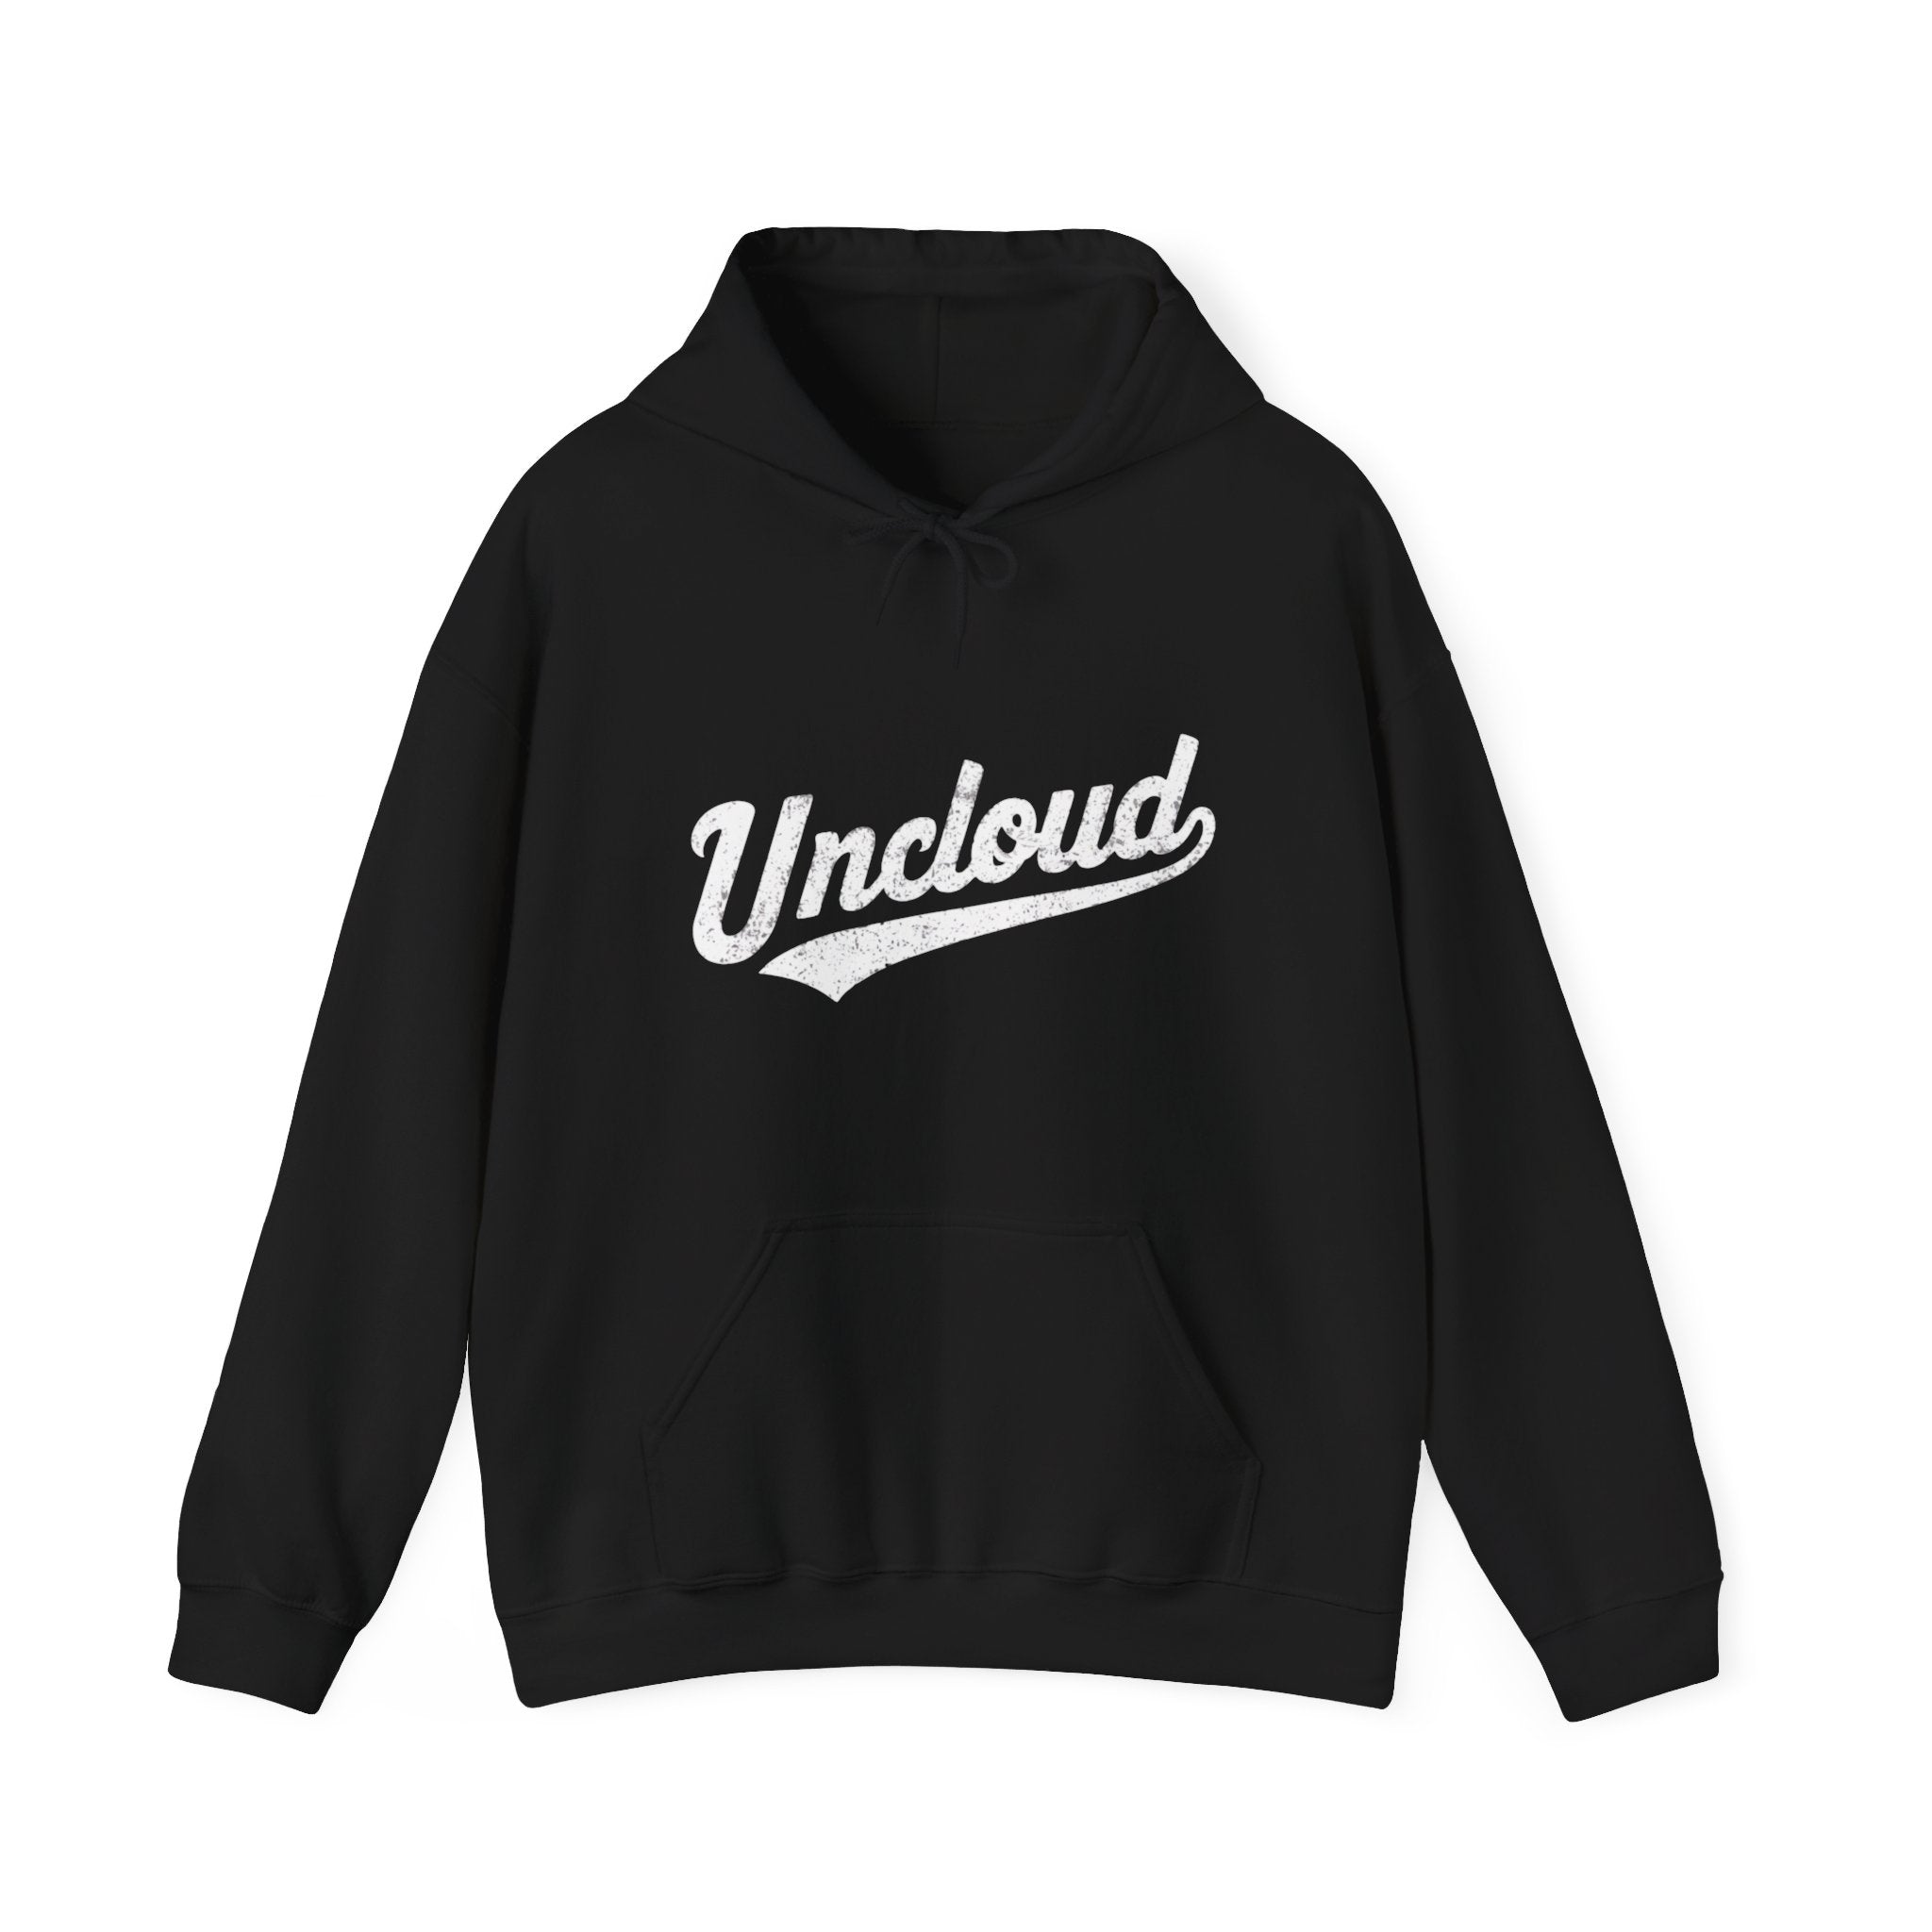 A Uncloud - Hooded Sweatshirt with the word "Uncloud" written in white, stylized, cursive text on the front. This heavy blend hoodie features a classic fit, a front pocket, and a drawstring hood.